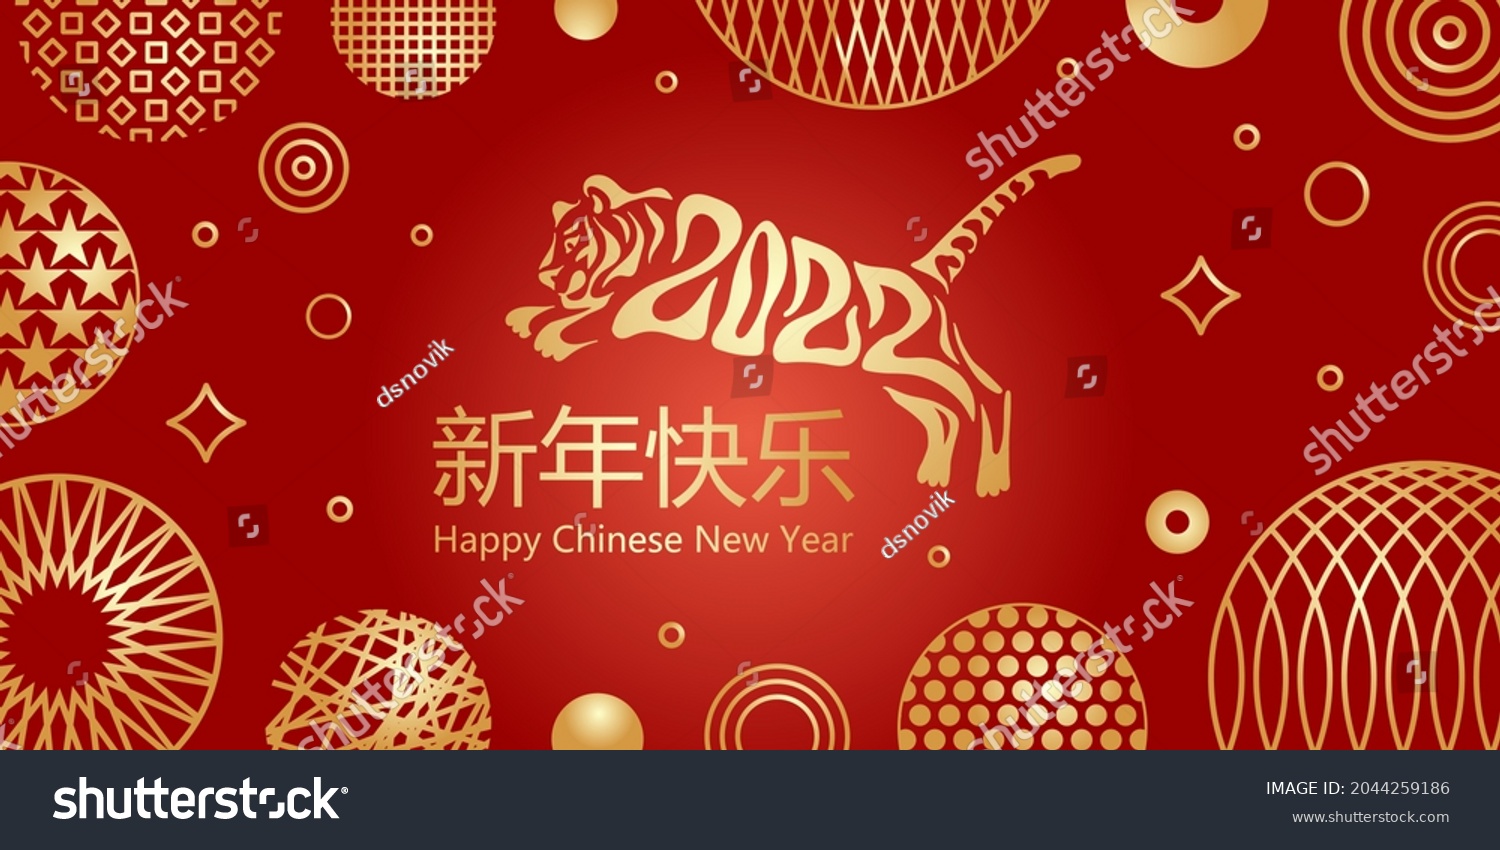 Happy New year 2022. The year of the tiger of lunar Eastern calendar. Creative tiger logo and number 2022 on a red background. Happy Chinese New Year Greeting Card, banner. #2044259186